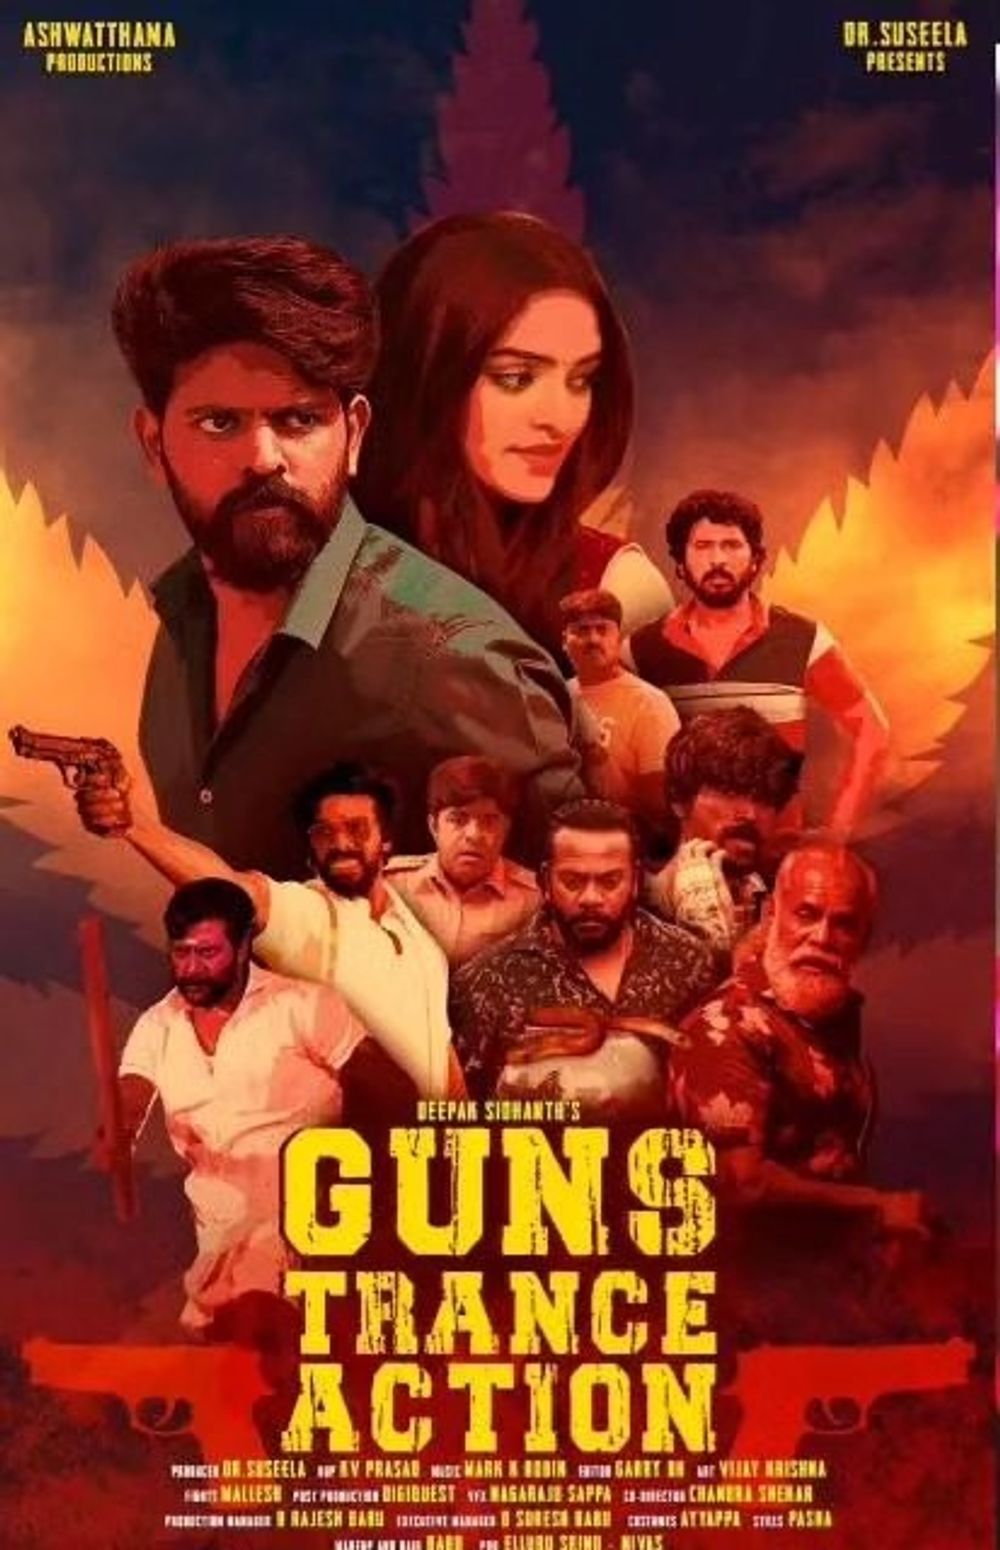 Guns Trance Action Movie Review